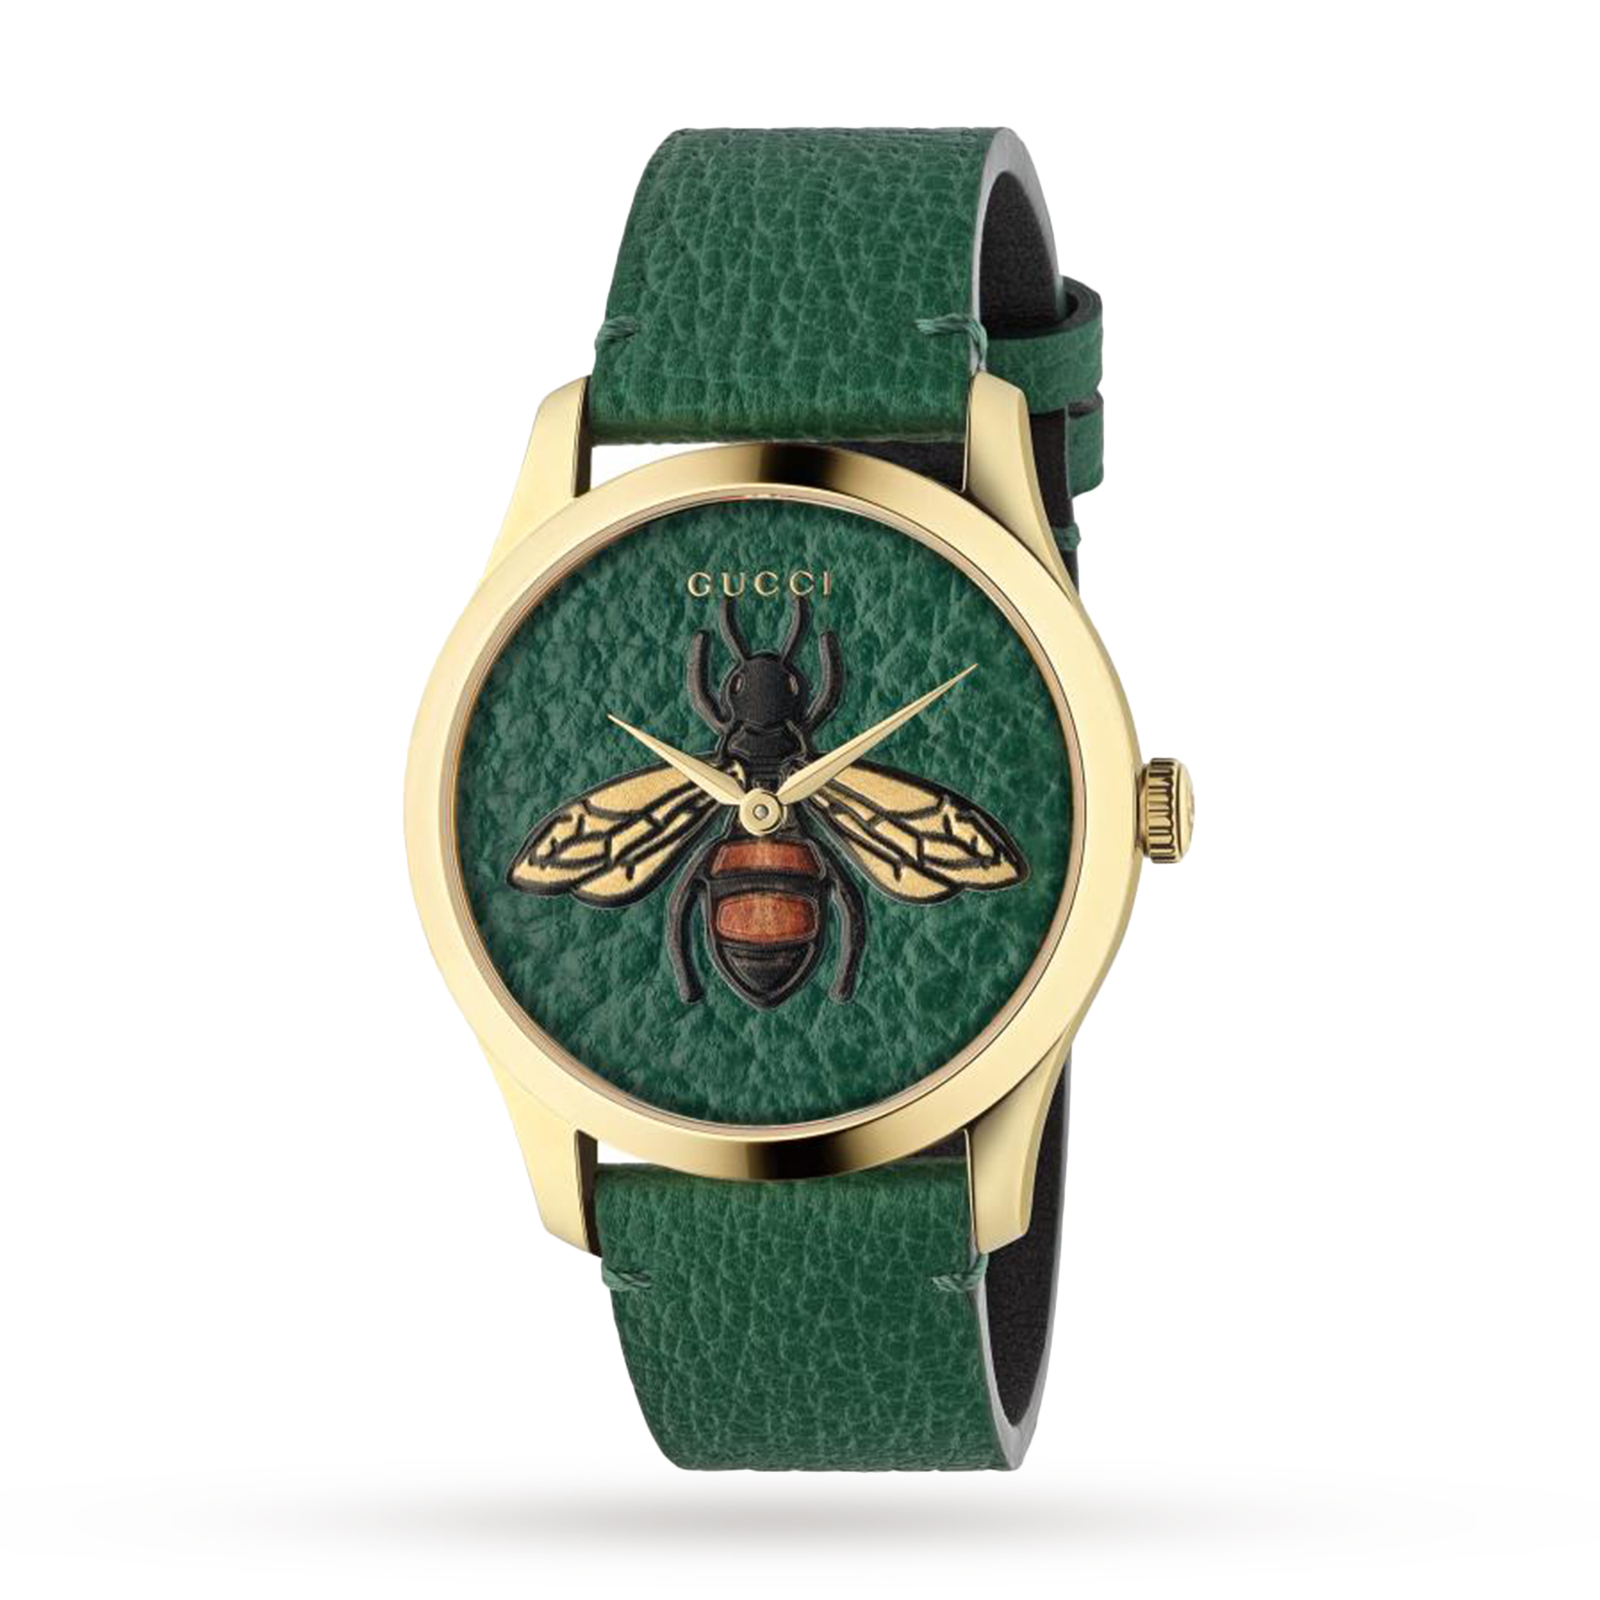 Gucci Brand Watch Best Sale, UP TO 50% OFF | www.loop-cn.com